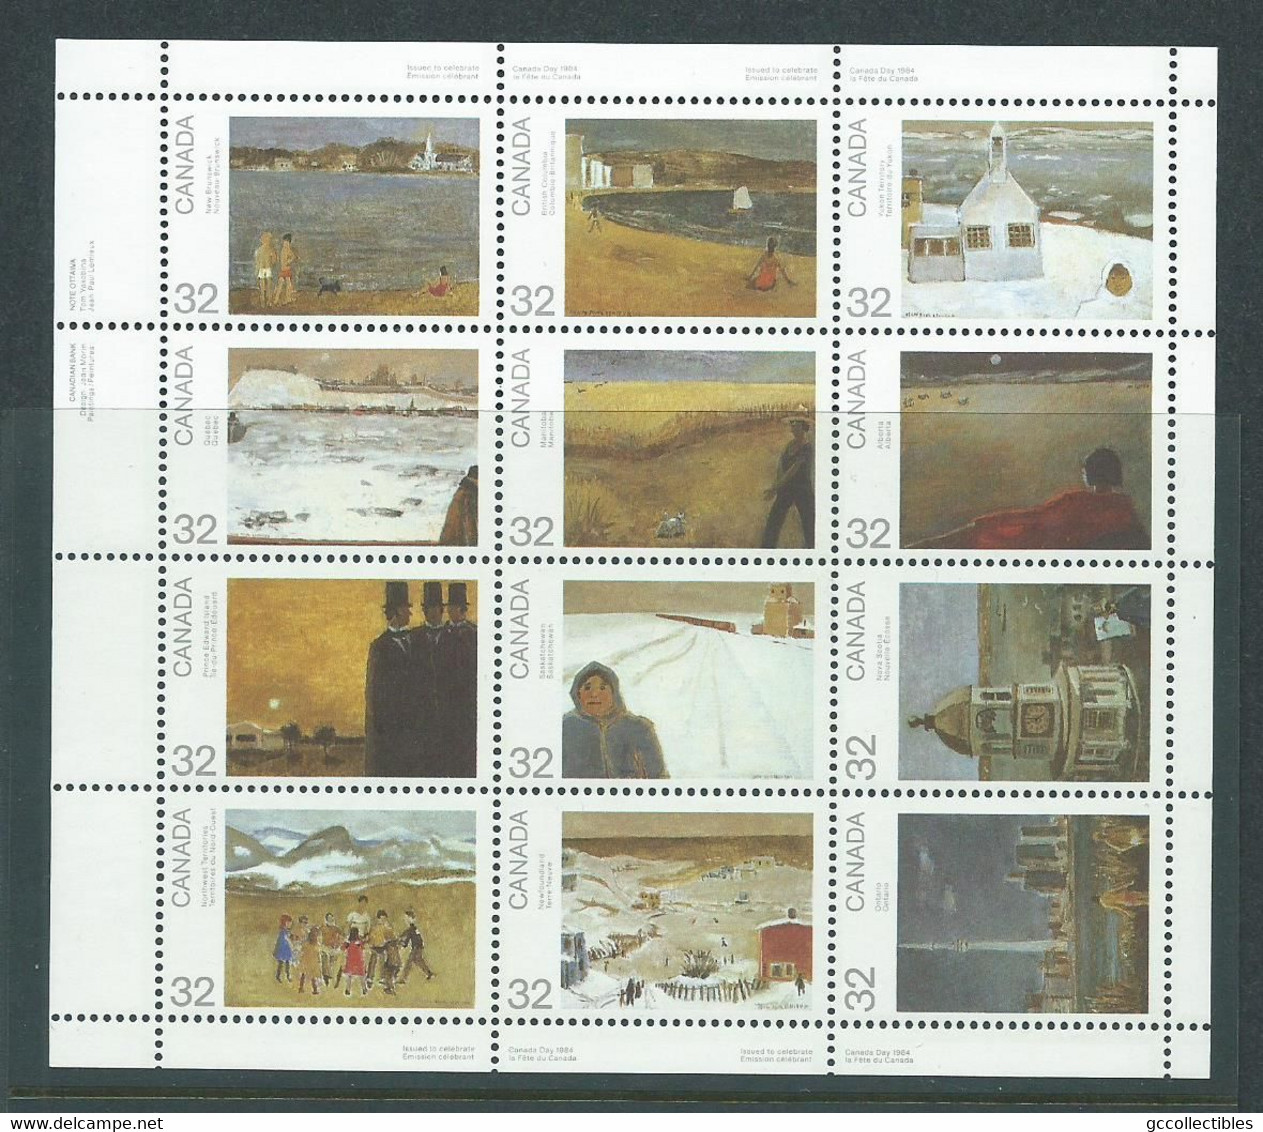 Canada # 1027a (1016-1027) Full Pane Of 12 UL PB Inscription MNH-Canada Day 1984 - Feuilles Complètes Et Multiples